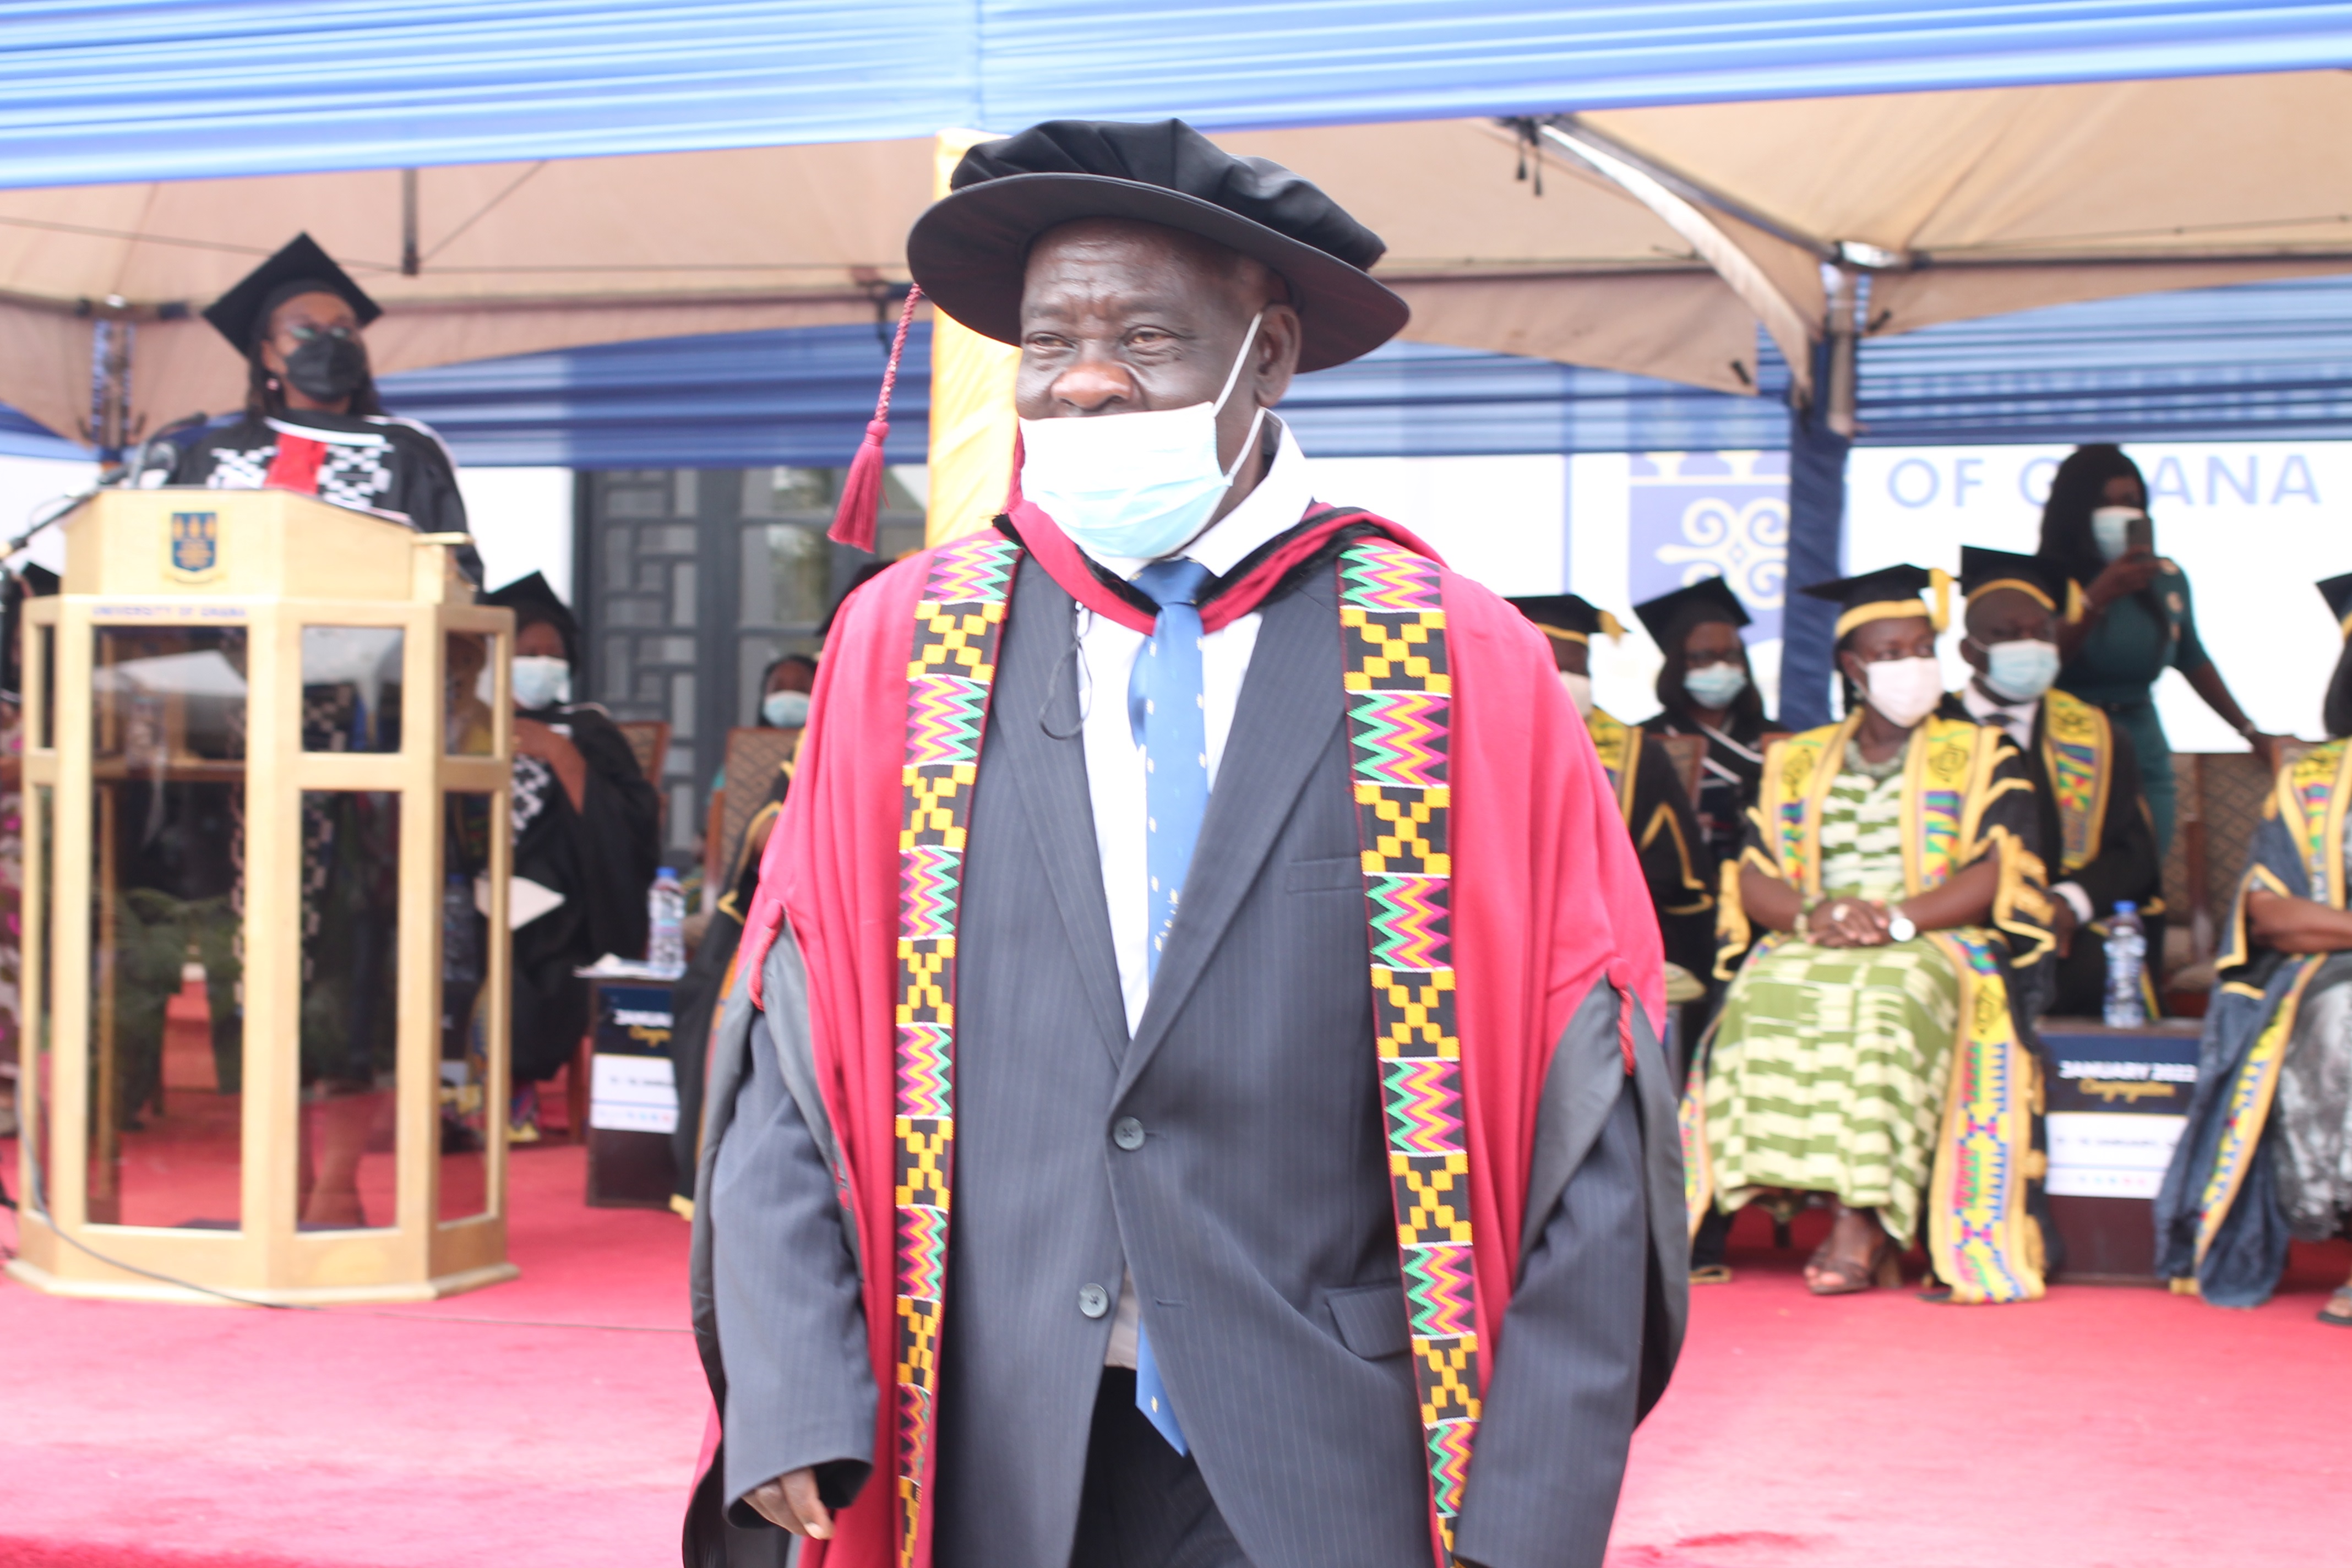 KAMA boss gets doctorate degree at age 72